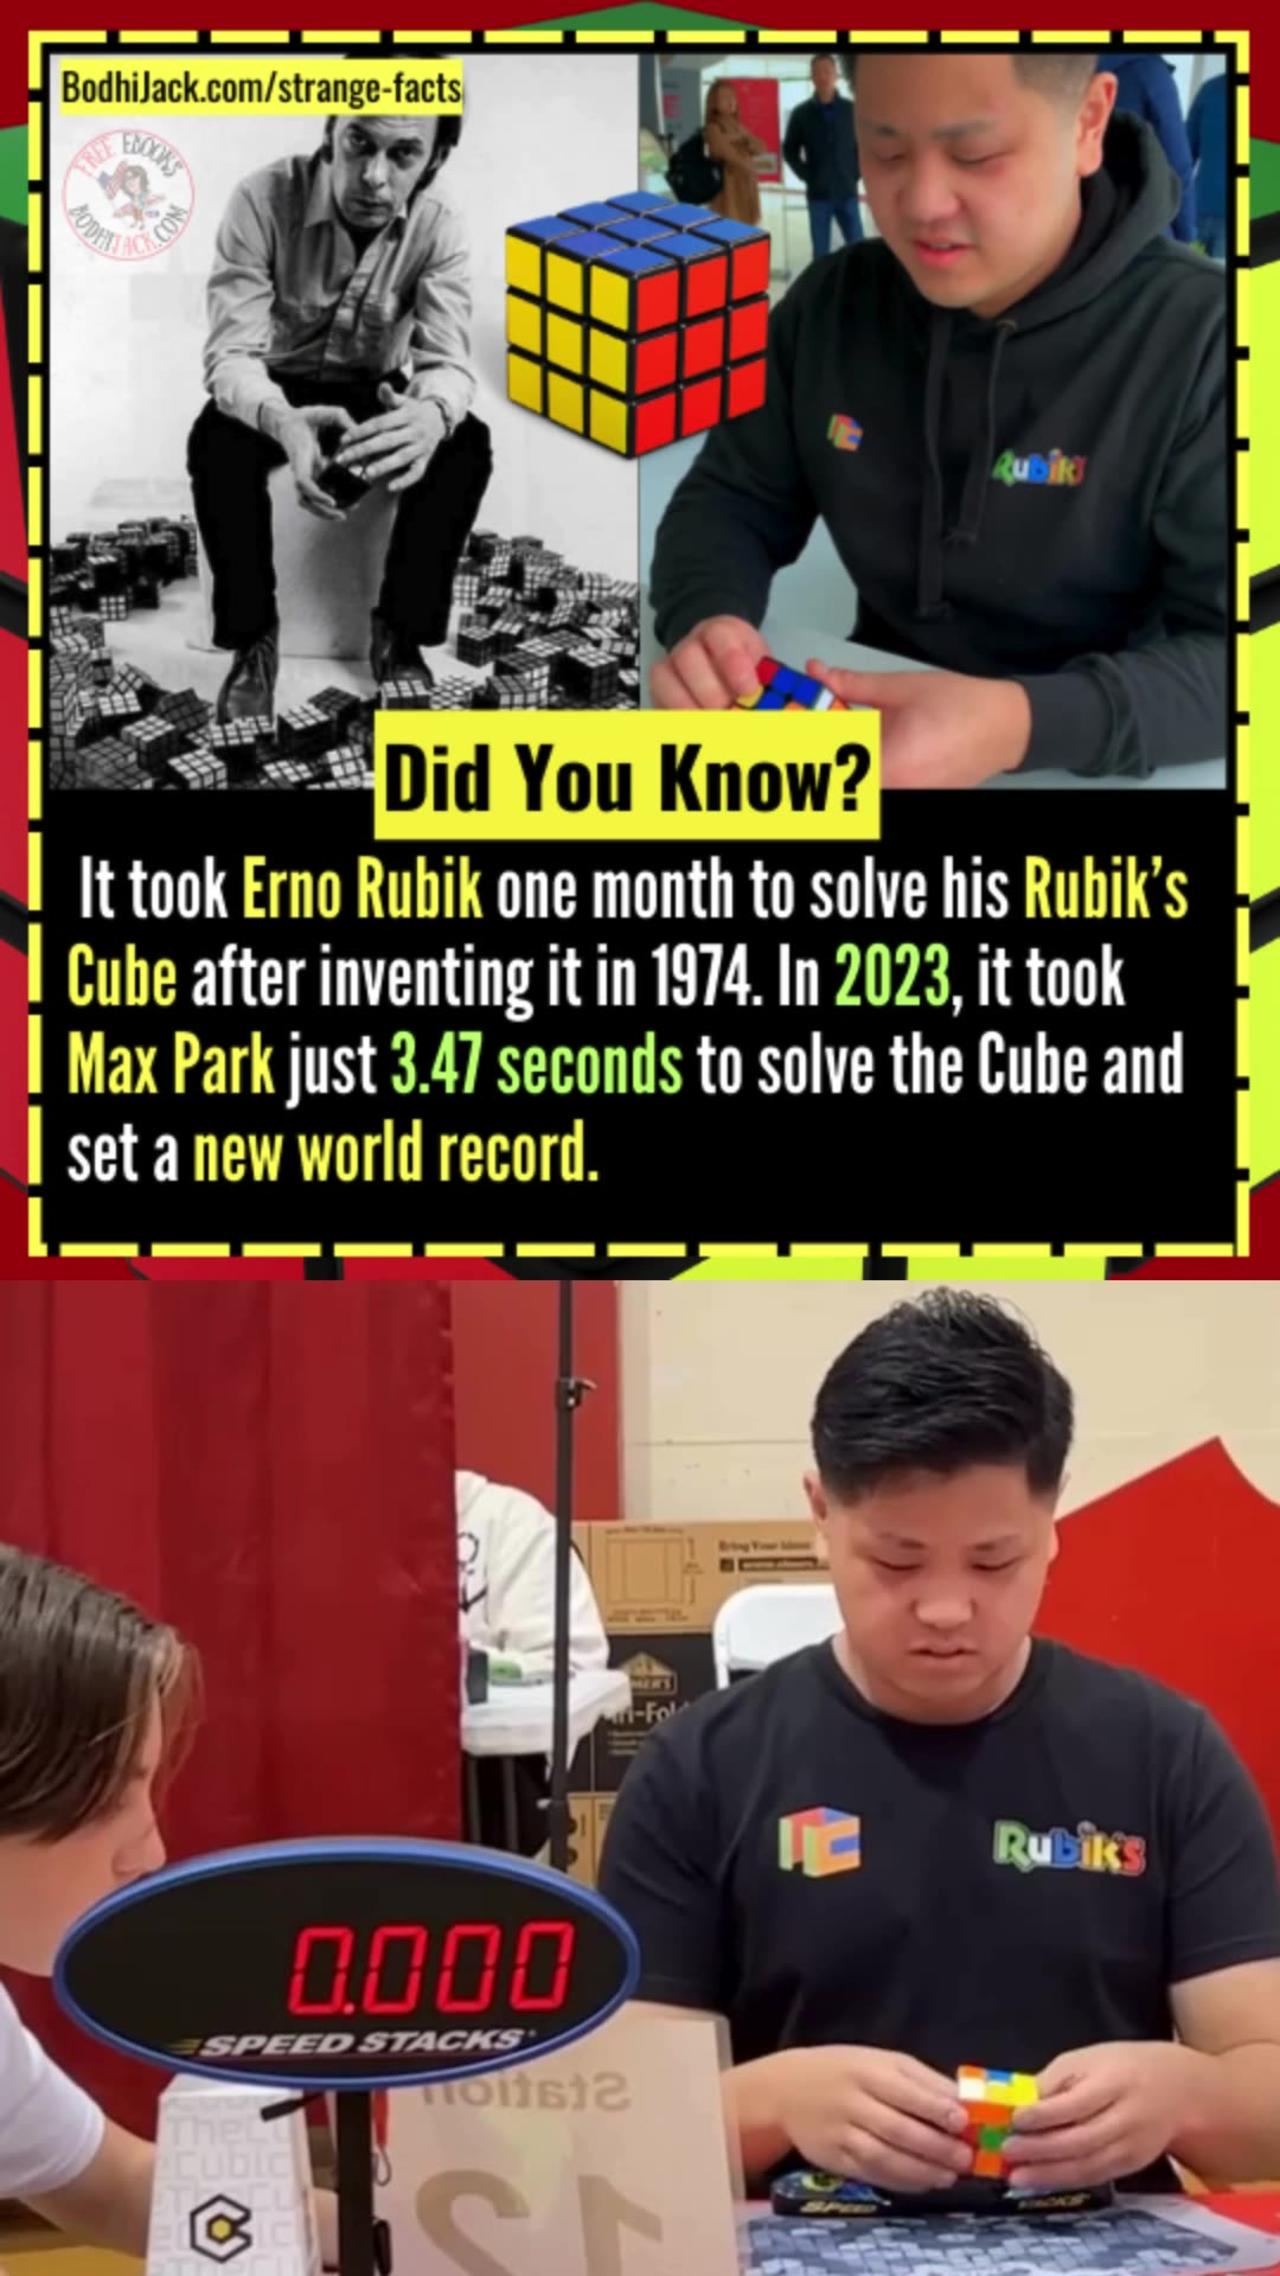 New World Record for solving Rubik's Cube - 3.47 SECONDS!